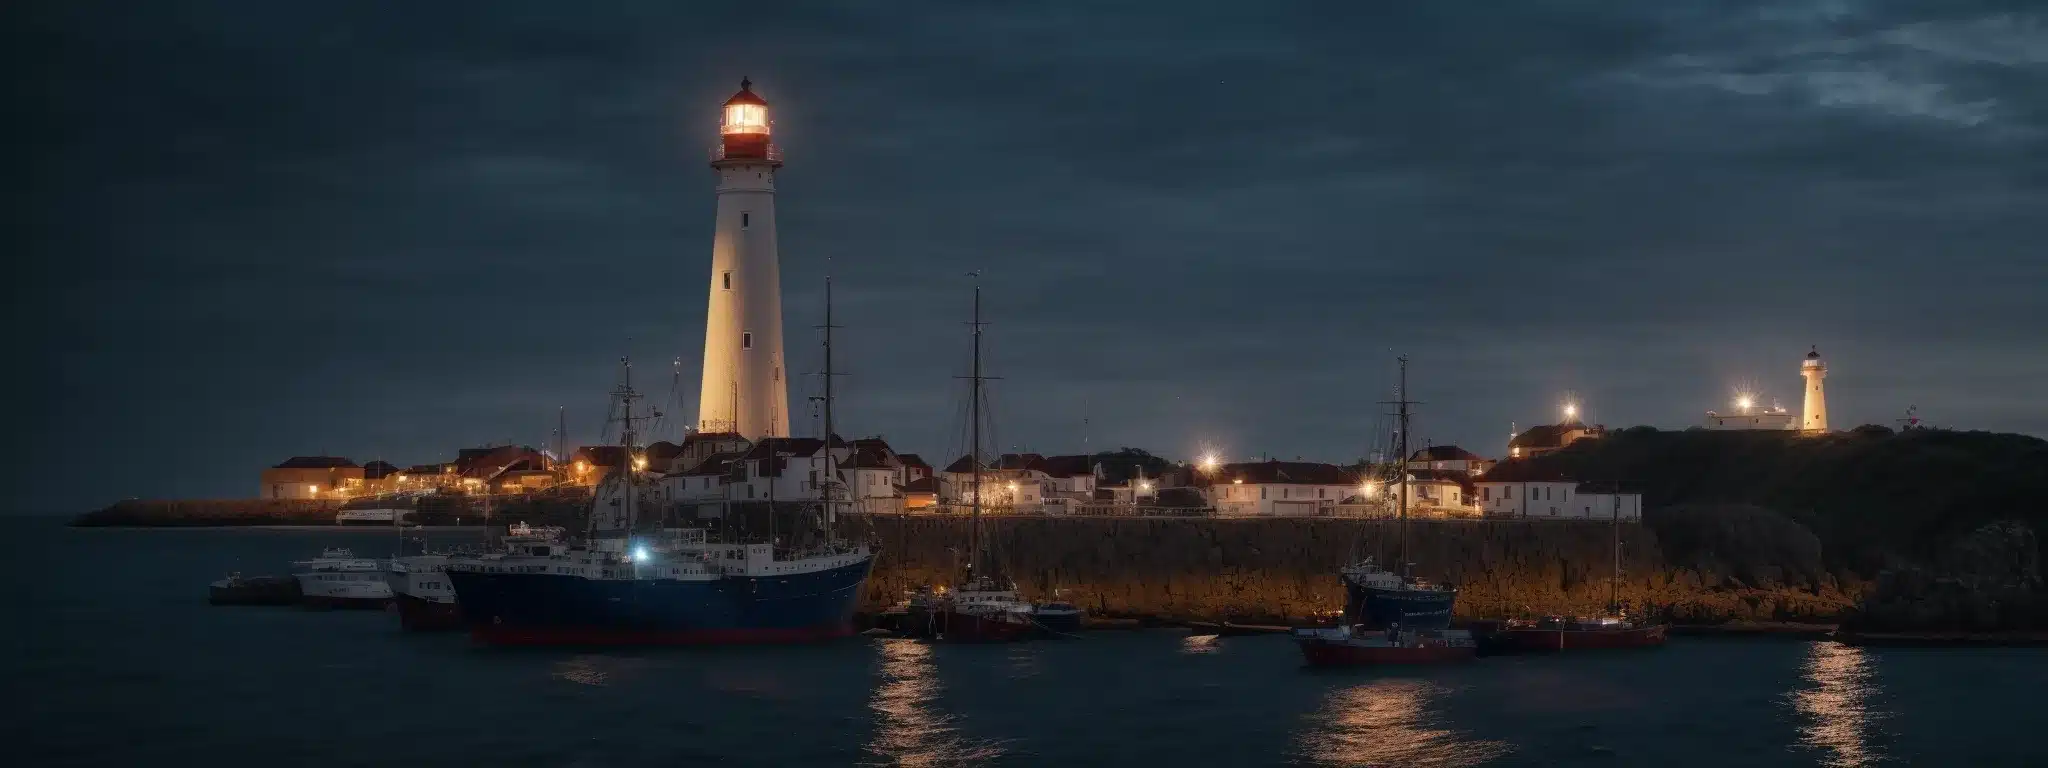 A Lighthouse Piercing The Night Sky Above A Bustling Port, Guiding Ships Through A Sea Dotted With Sailing Vessels.